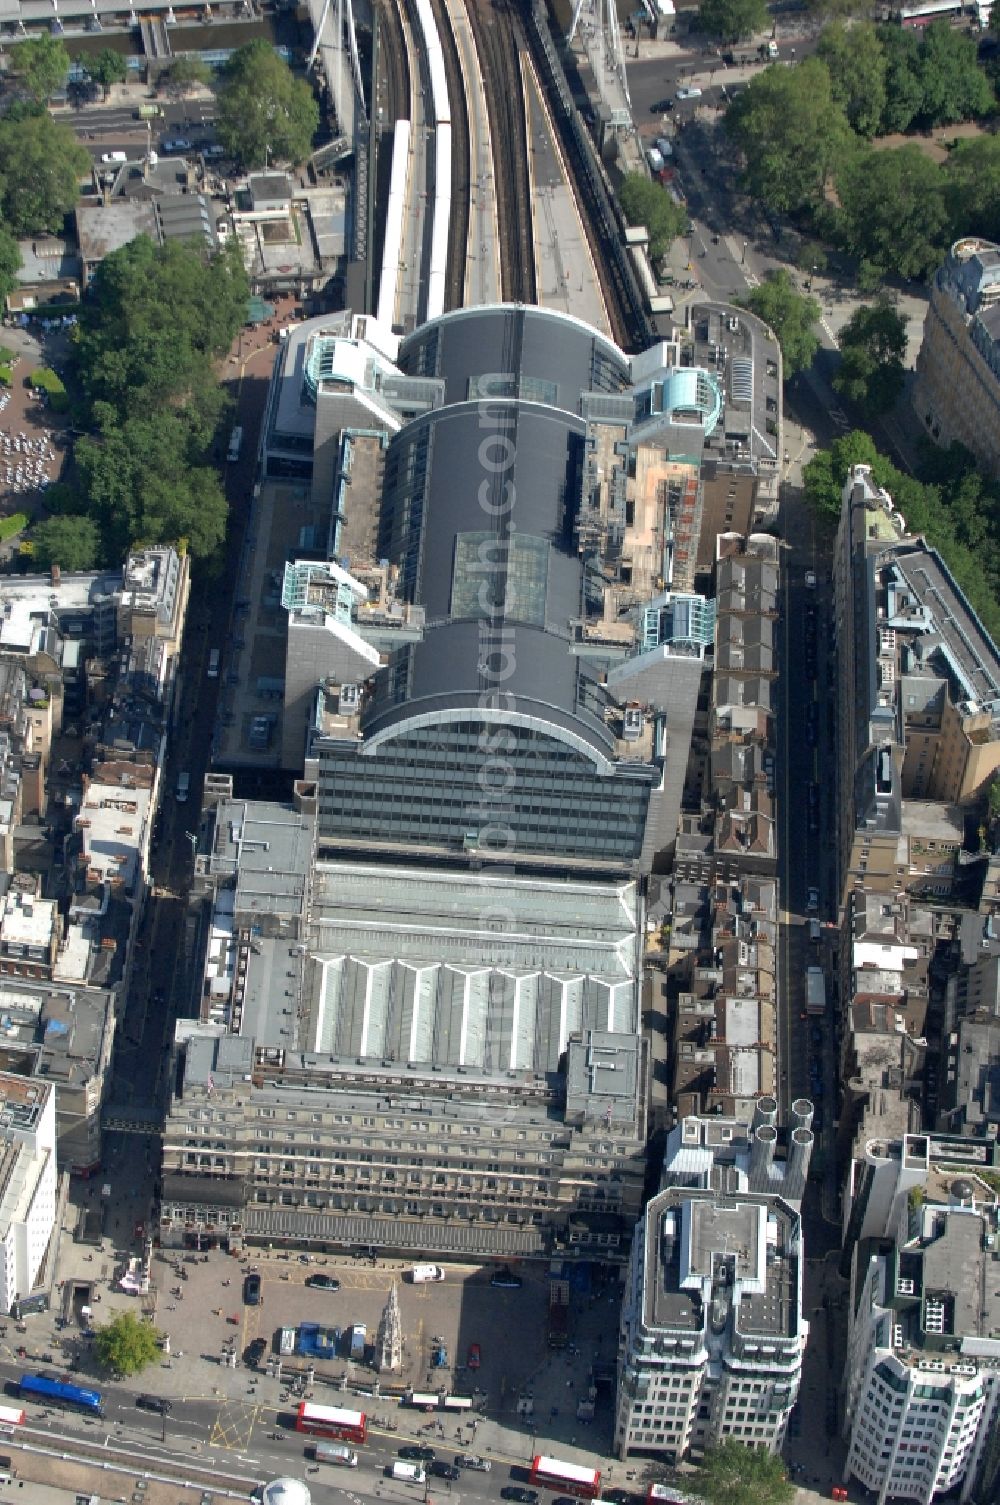 Aerial image London - Sight on the Charing Cross railway station in the London borough City of Westminster in the centre of London. The railway station Charing Cross is the fifth busiest rail terminal of London